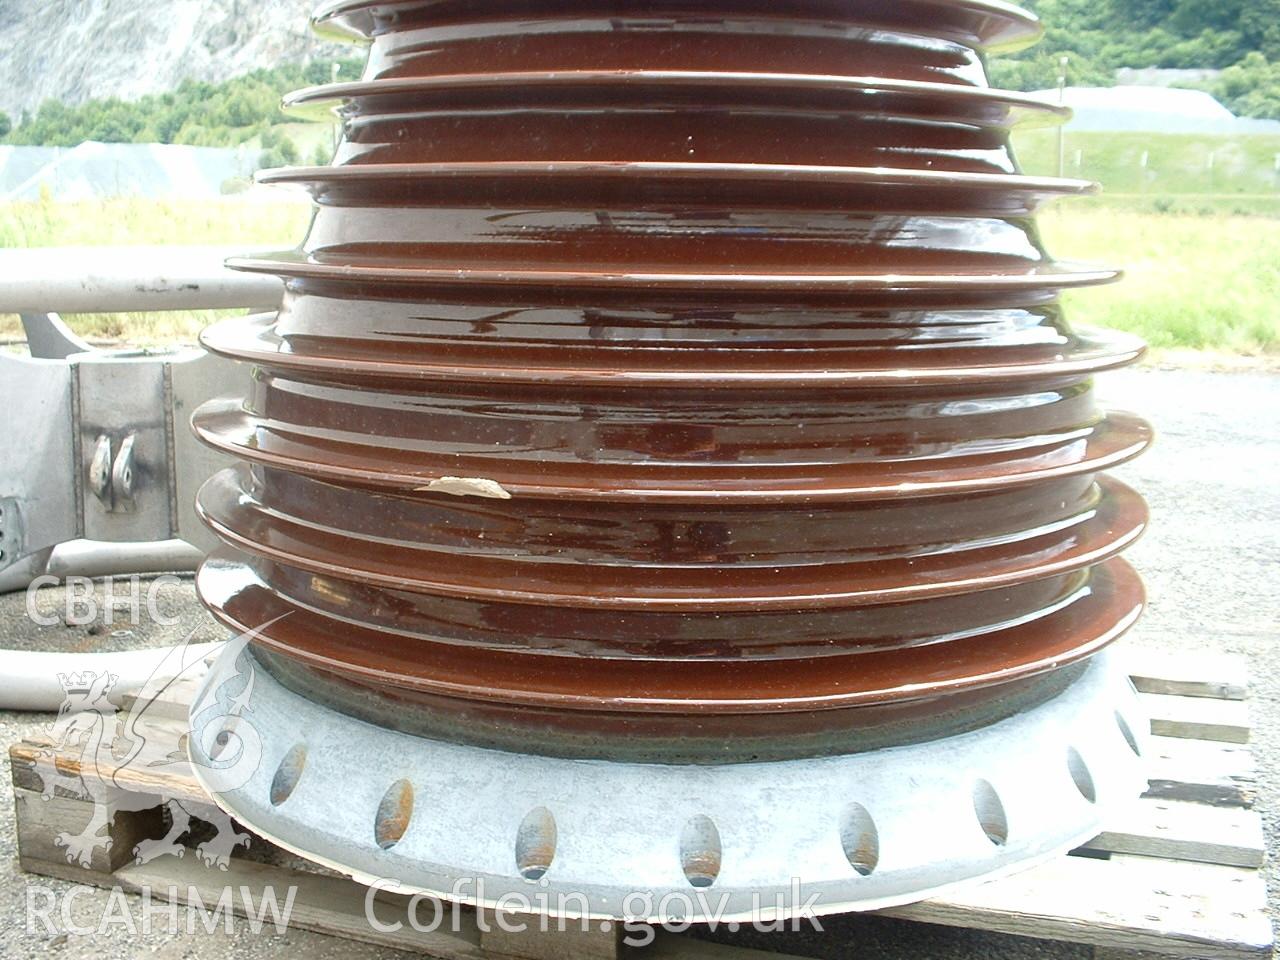 Colour digital photograph of the Very Low Frequency lead out insulator.